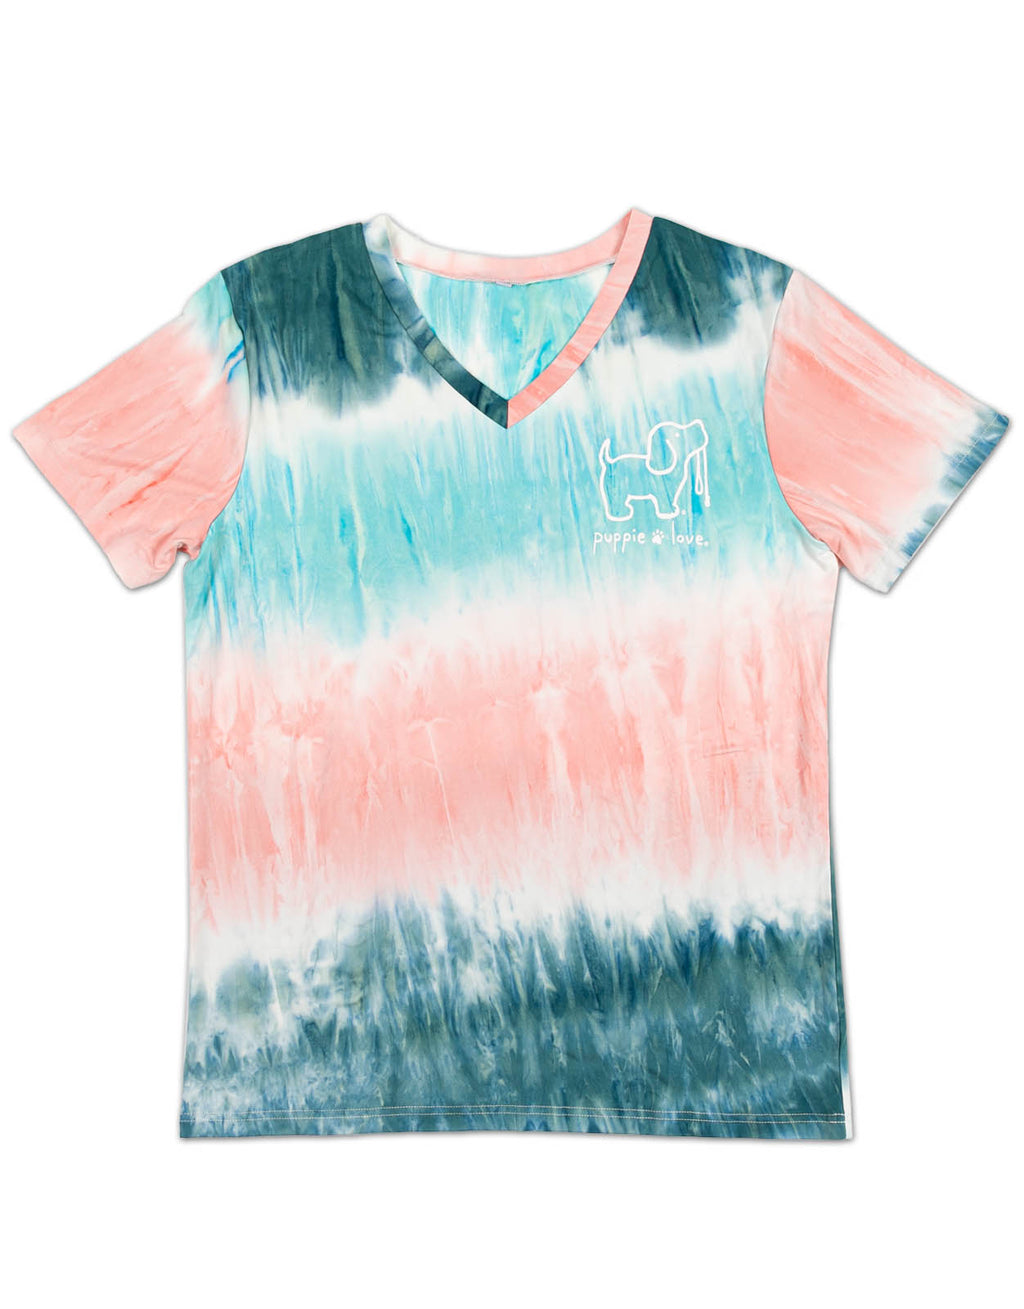 PINK/TURQUOISE STRIPED TIE DYE LOUNGE V-NECK - Puppie Love